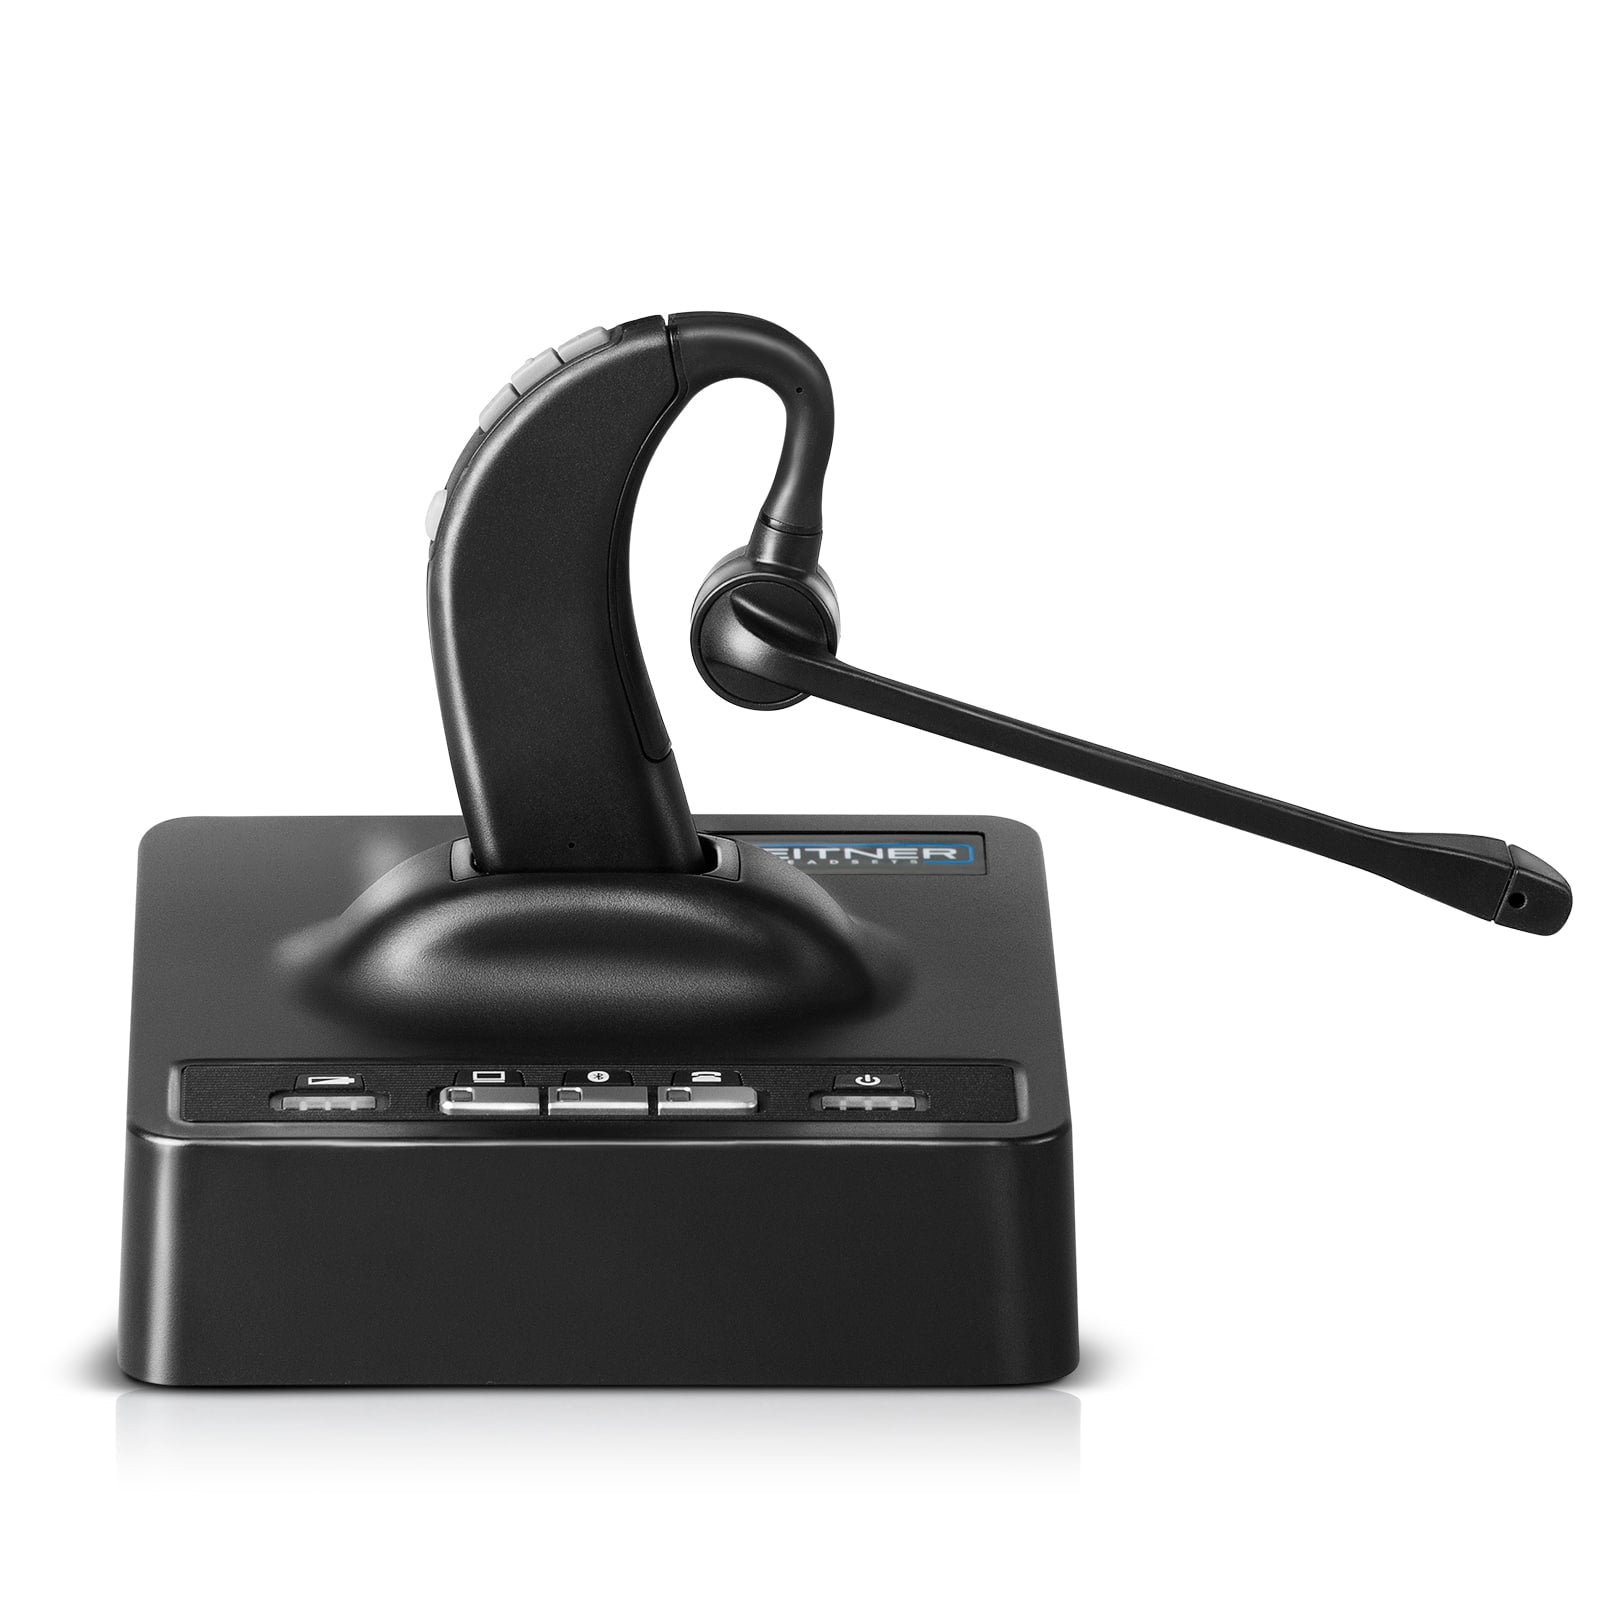 Leitner LH380 wireless Bluetooth office headset for cell phone computer and desk phone